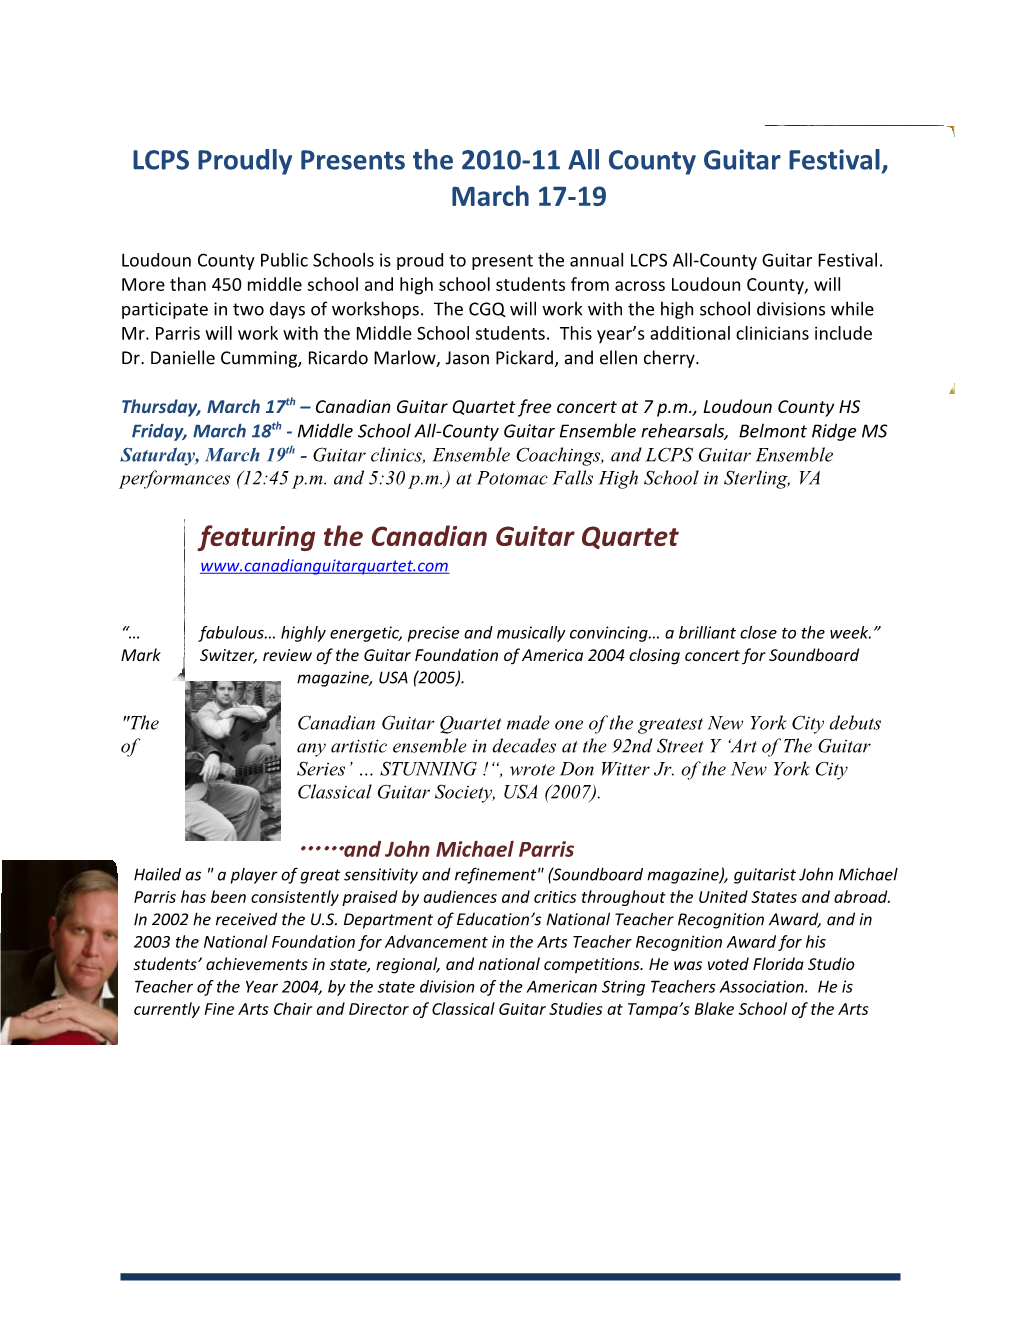 LCPS Proudly Presents the 2010-11 All County Guitar Festival, March 17-19